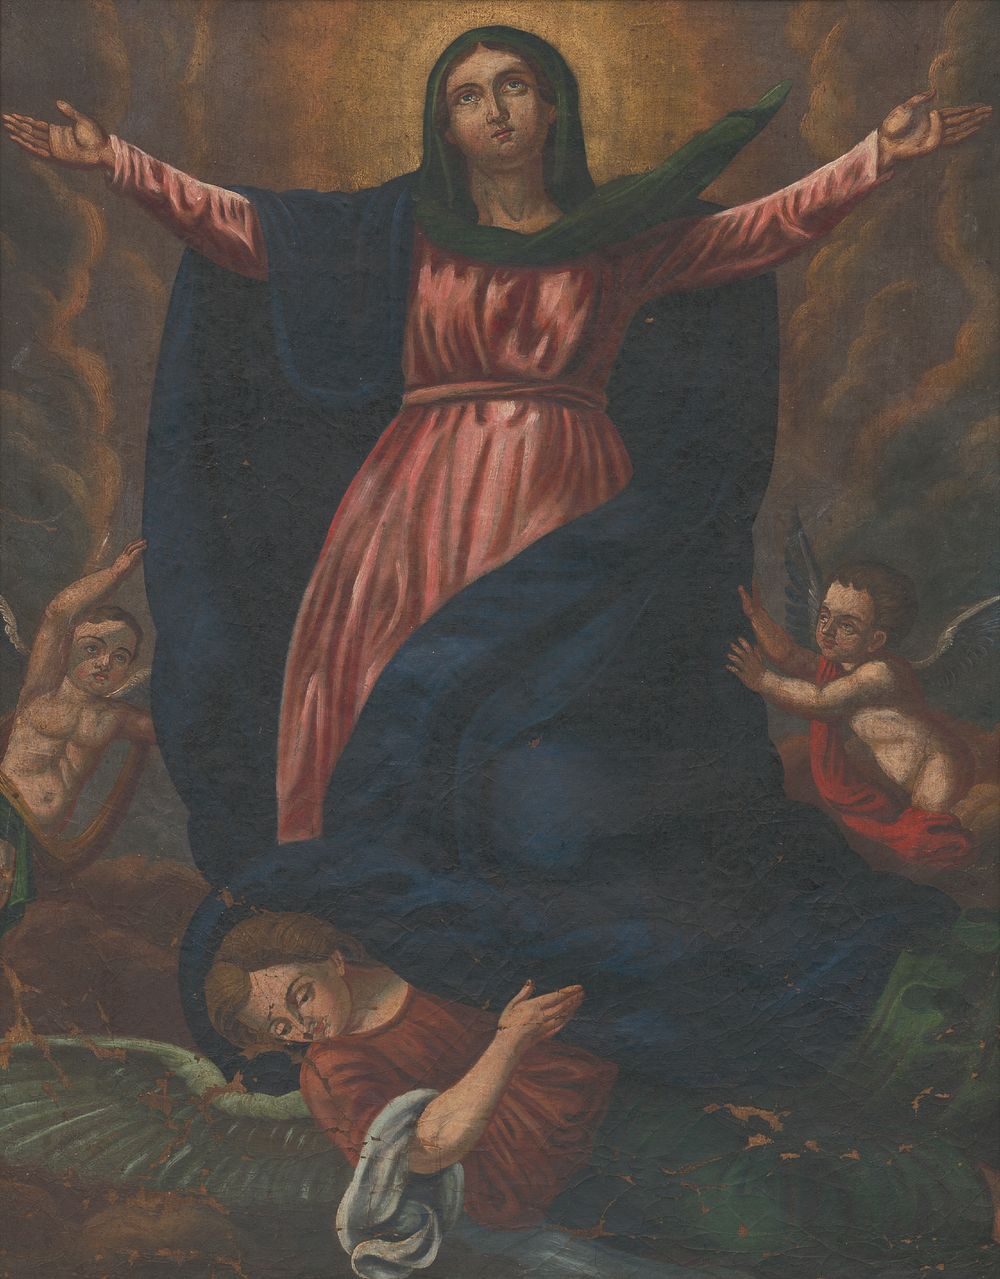 The ascension of st. mary / st. mary immaculata by Maximili&aacute;n Ratskay St.